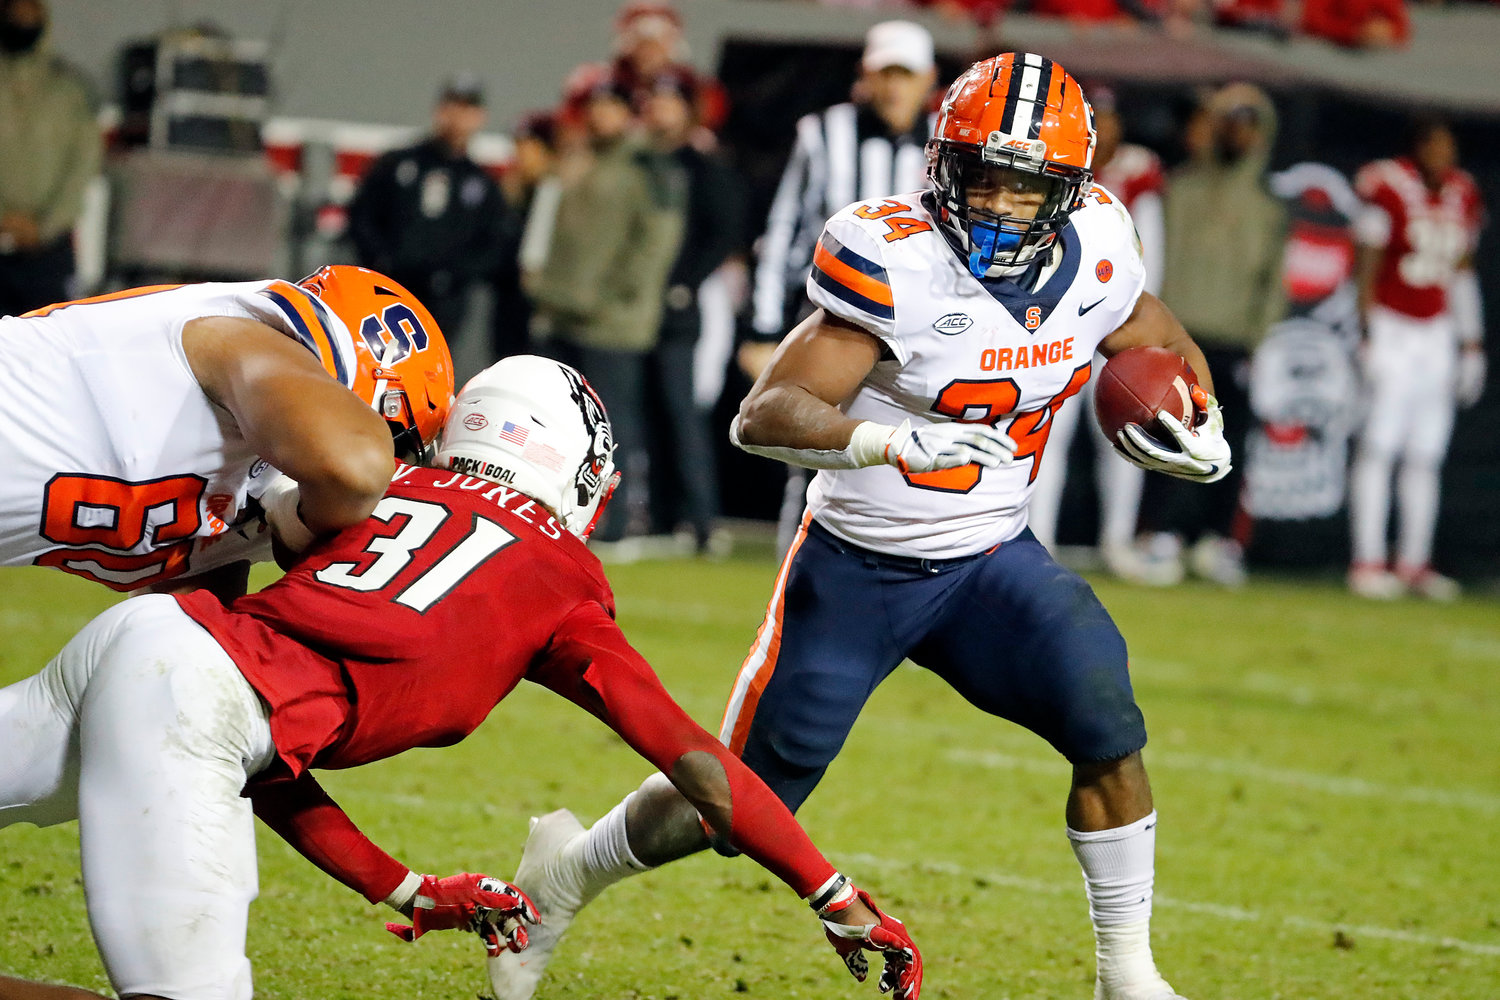 SINGLE-SEASON RUSHING LEADER — Syracuse's Sean Tucker (34) runs the ball away from North Carolina State's Vi Jones (31) during the second half of an NCAA college football game in Raleigh, N.C., Saturday, Nov. 20. The Orange lost to the Wolfpack, 41-17.